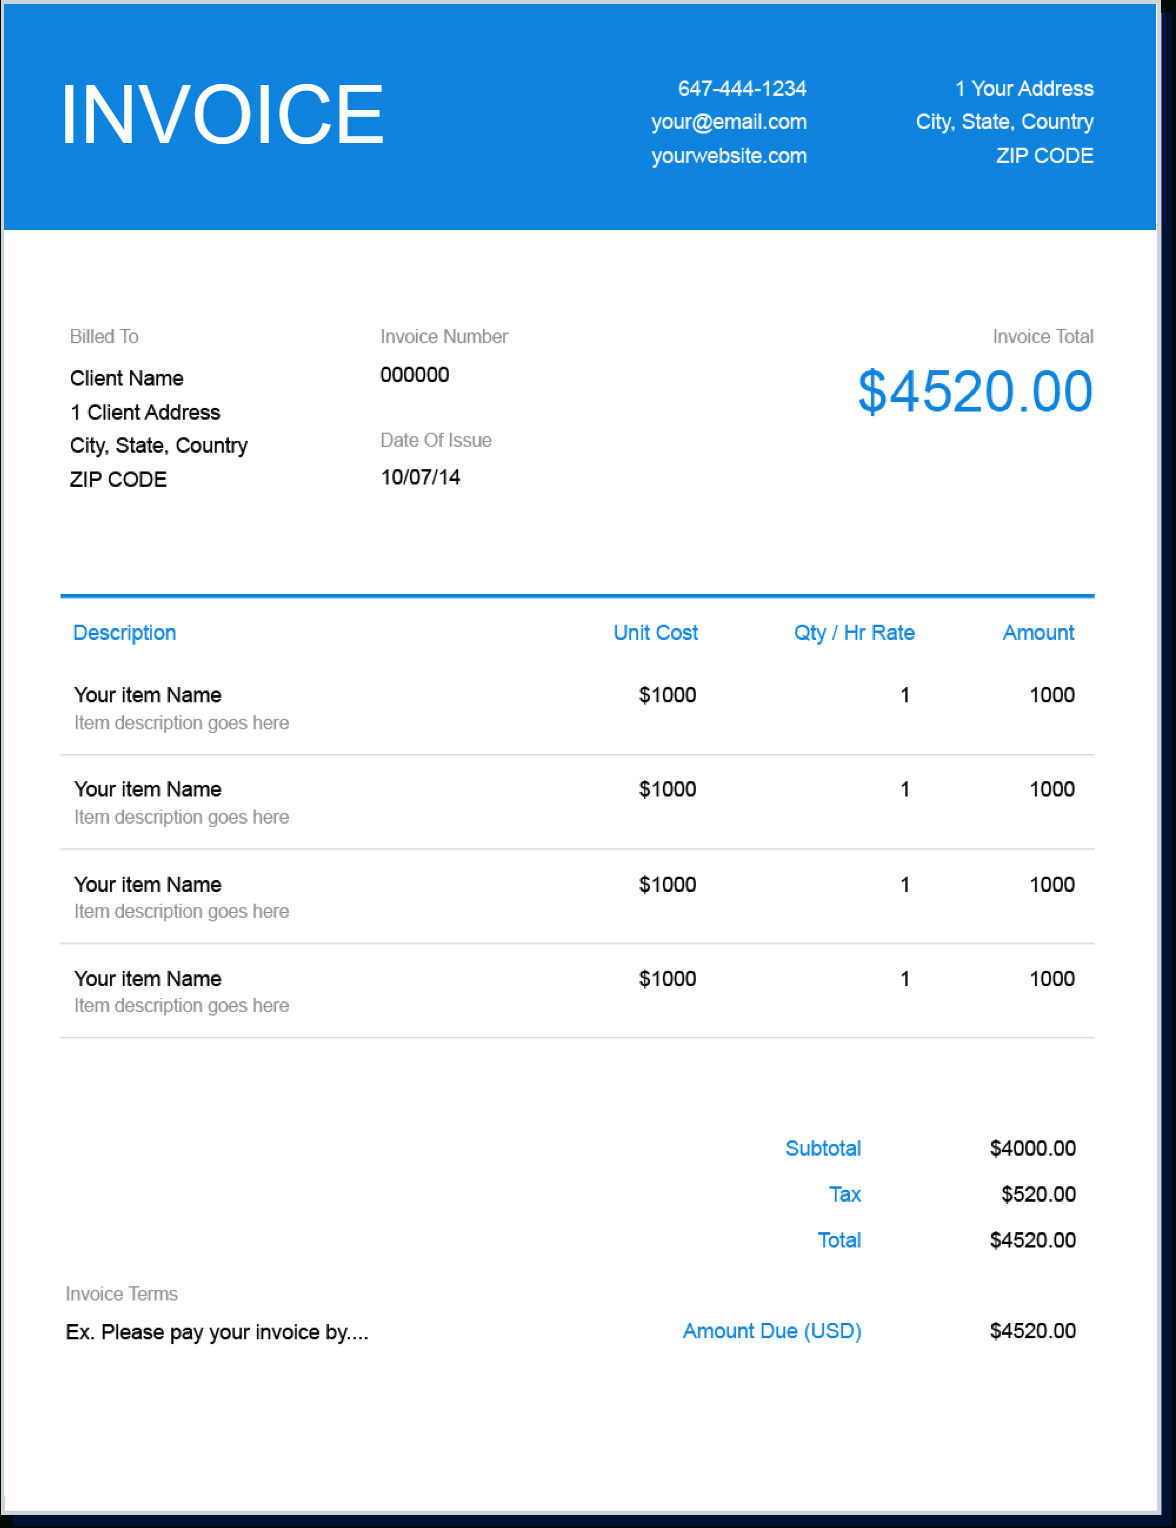 Invoice Template | Create And Send Free Invoices Instantly Pertaining To Free Downloadable Invoice Template For Word